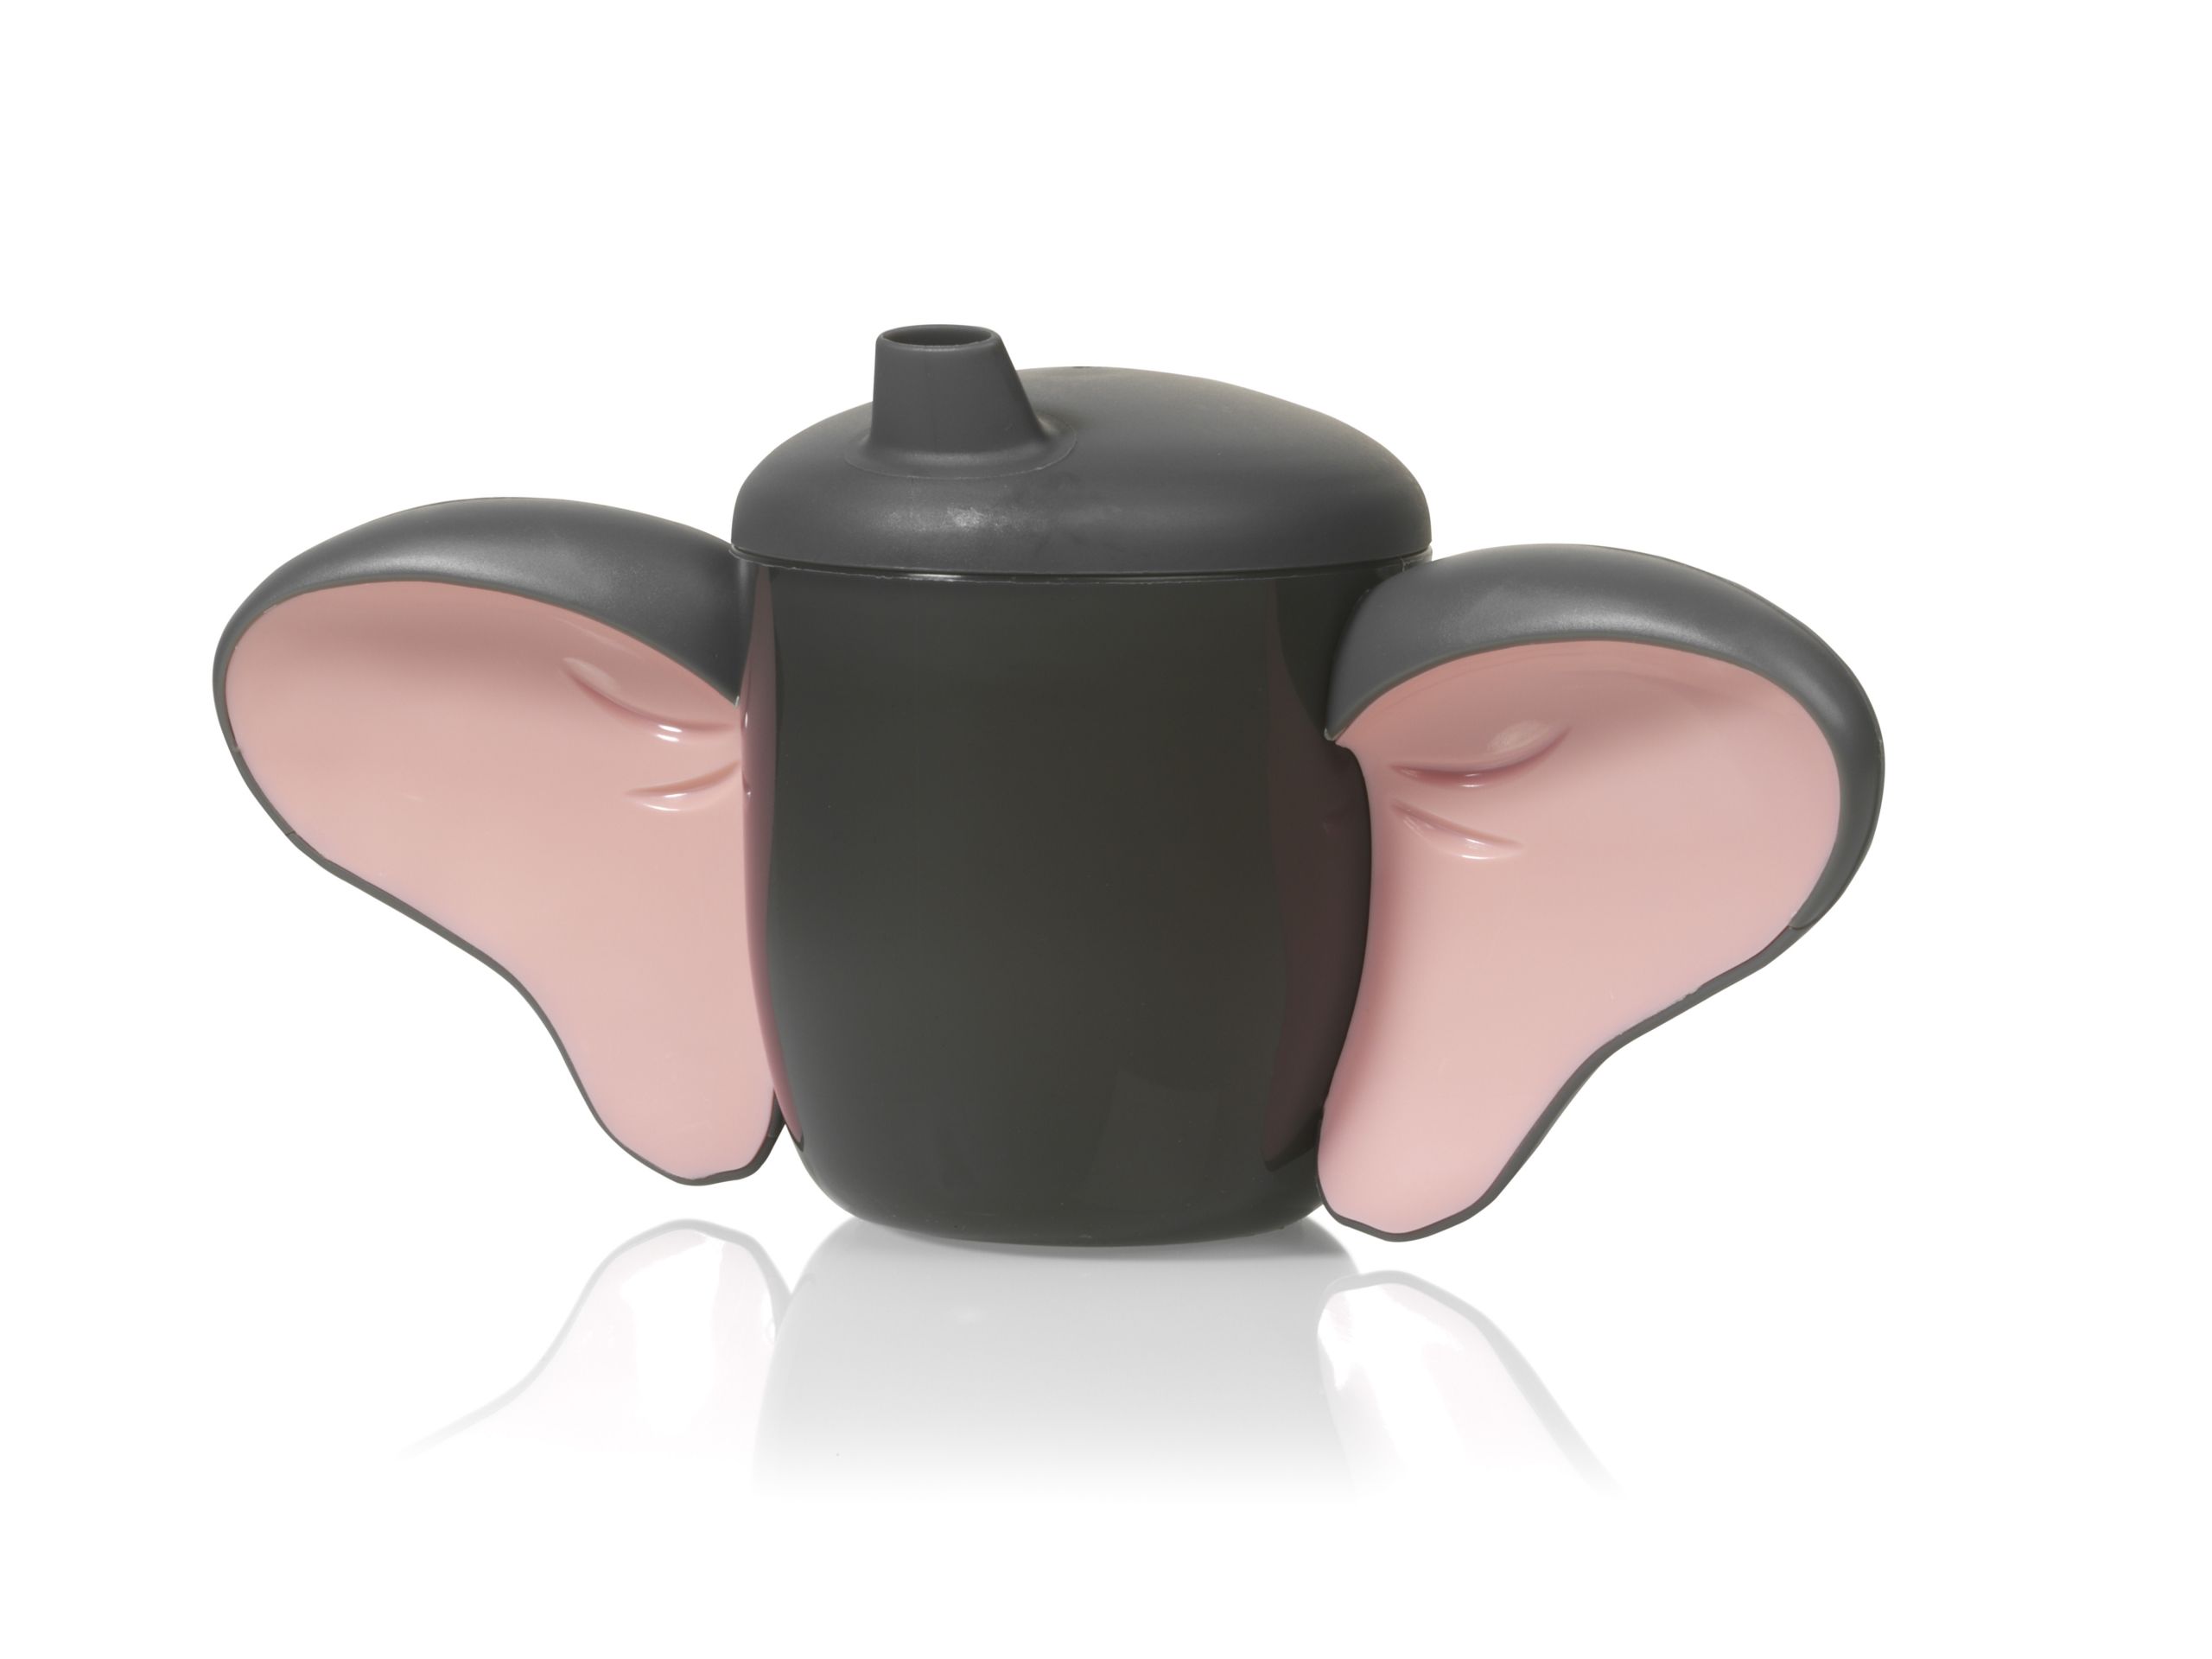 Elephant sippy cup